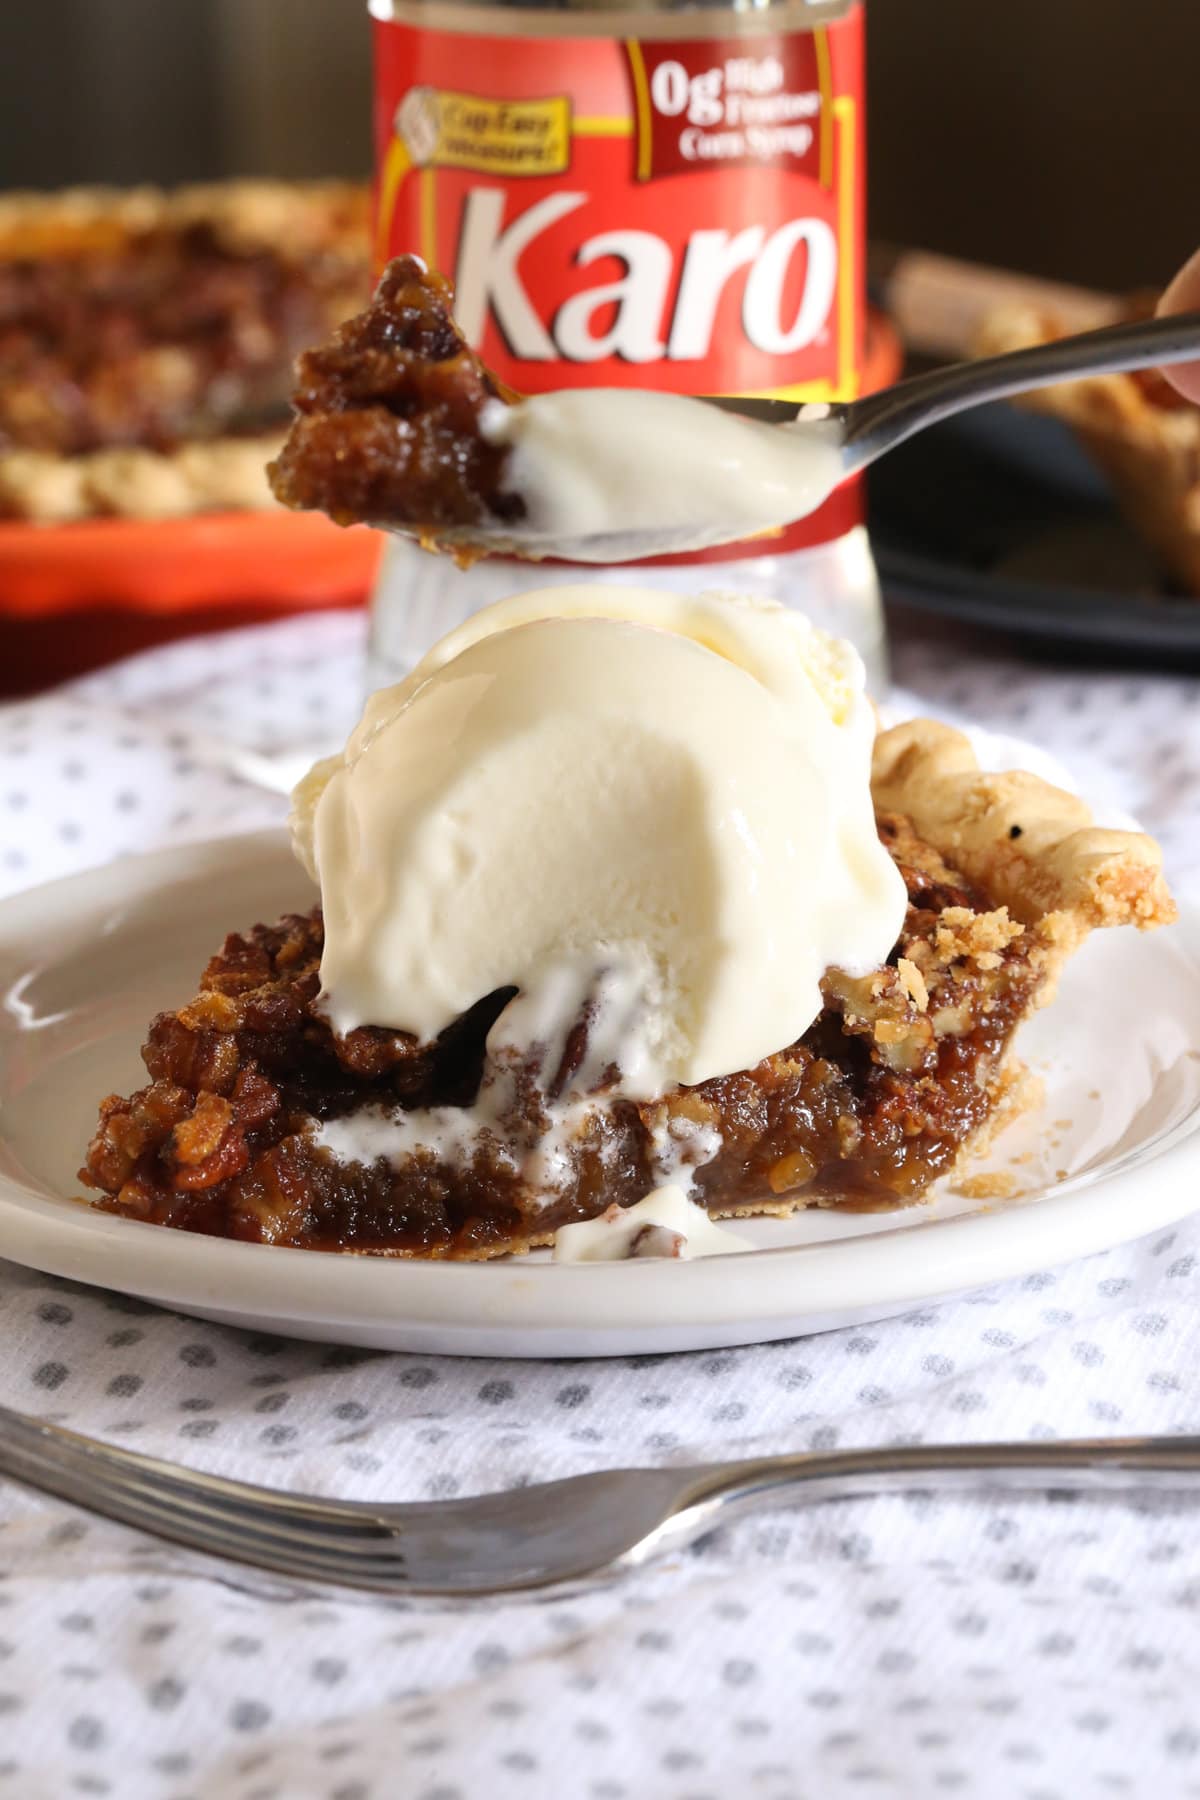 A slice of pecan pie on a plate with a bottle of Karo syrup in the background  and a scoop of ice cream on top with a spoon taking a bite